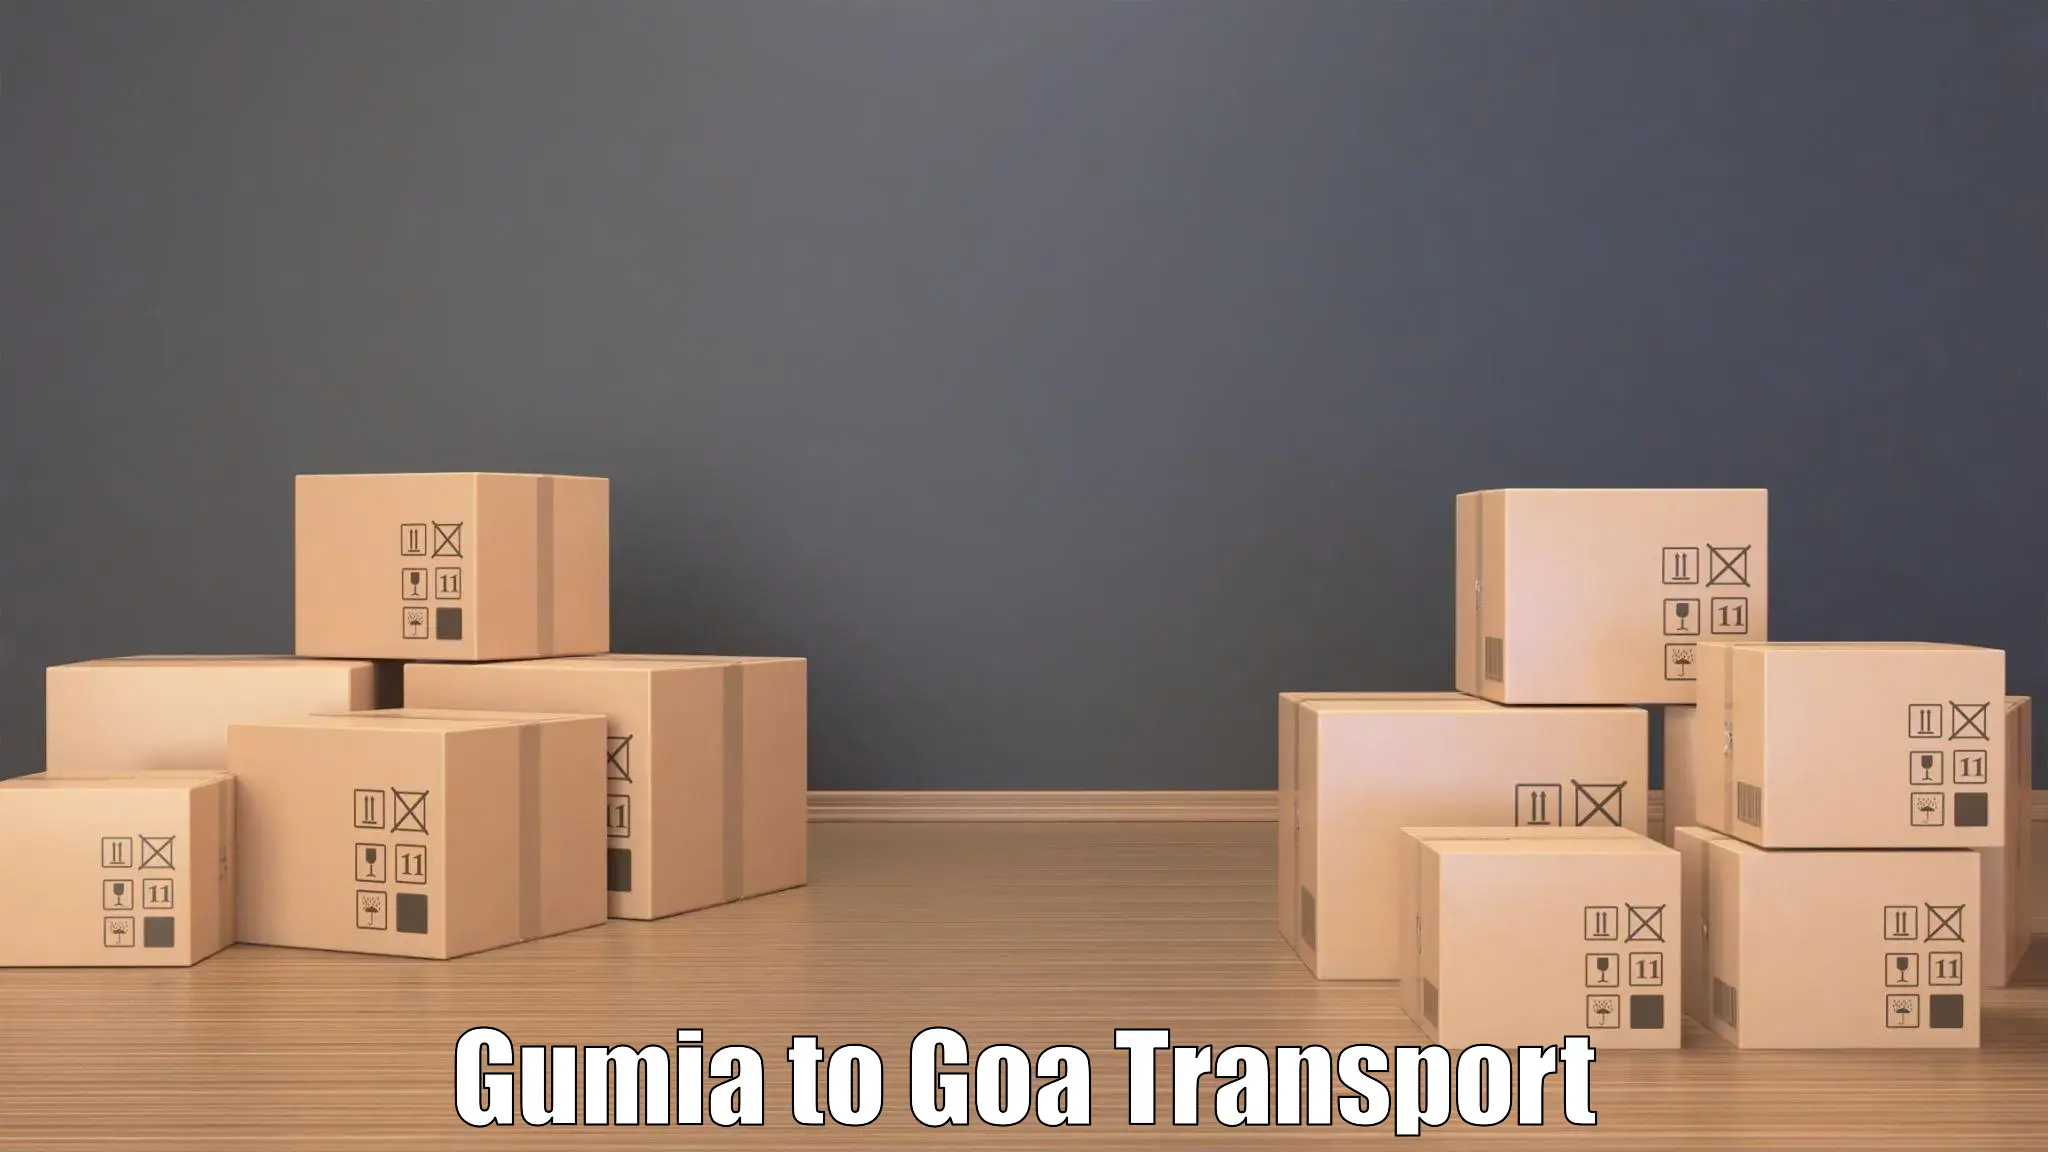 Nearby transport service Gumia to Goa